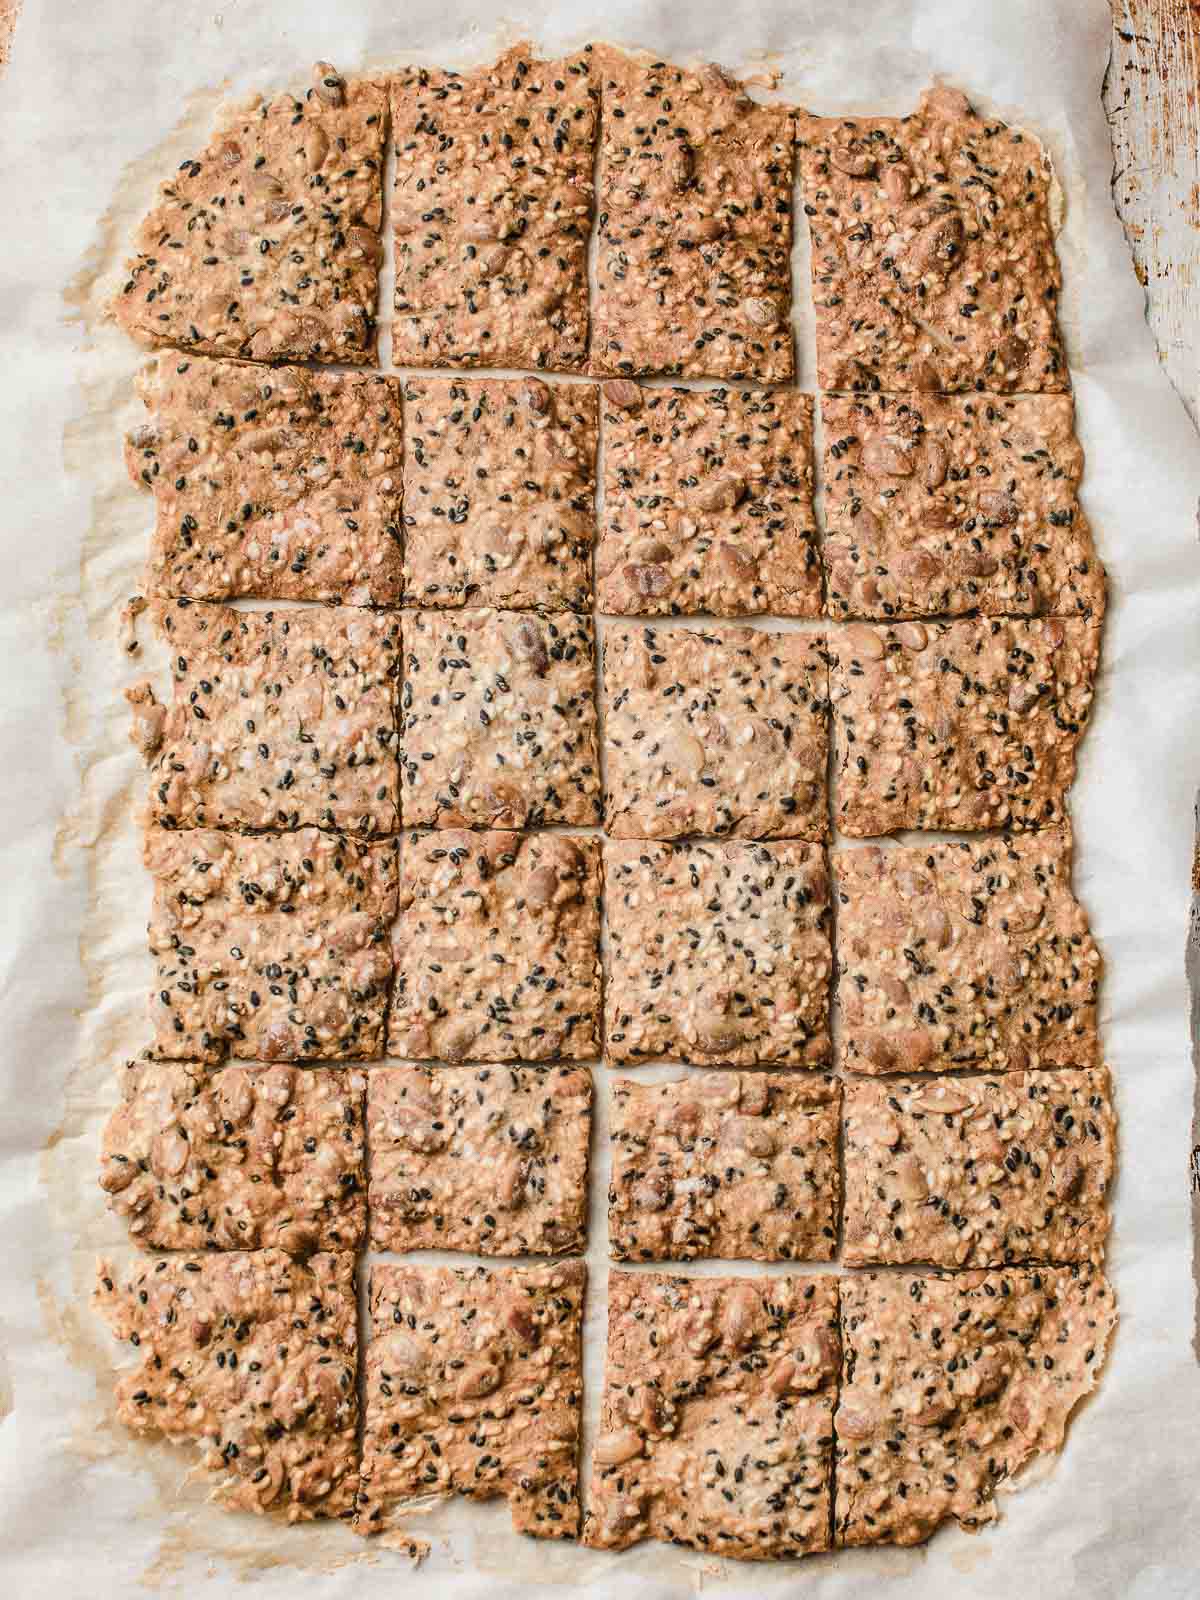 Baked sourdough seed crackers on parchment paper.